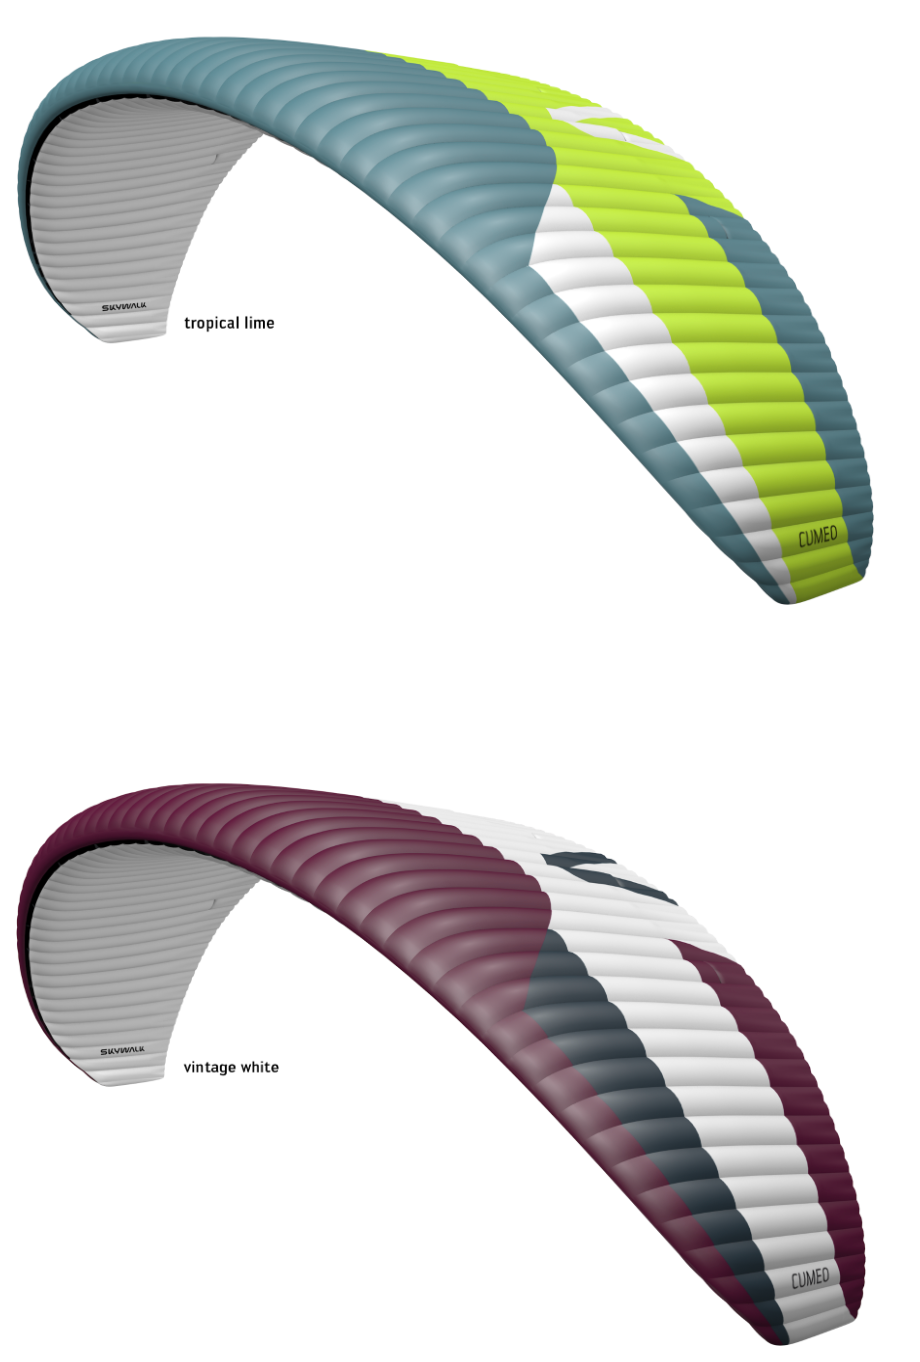 Skywalk Cumeo 2 glider colours sold at FlySpain